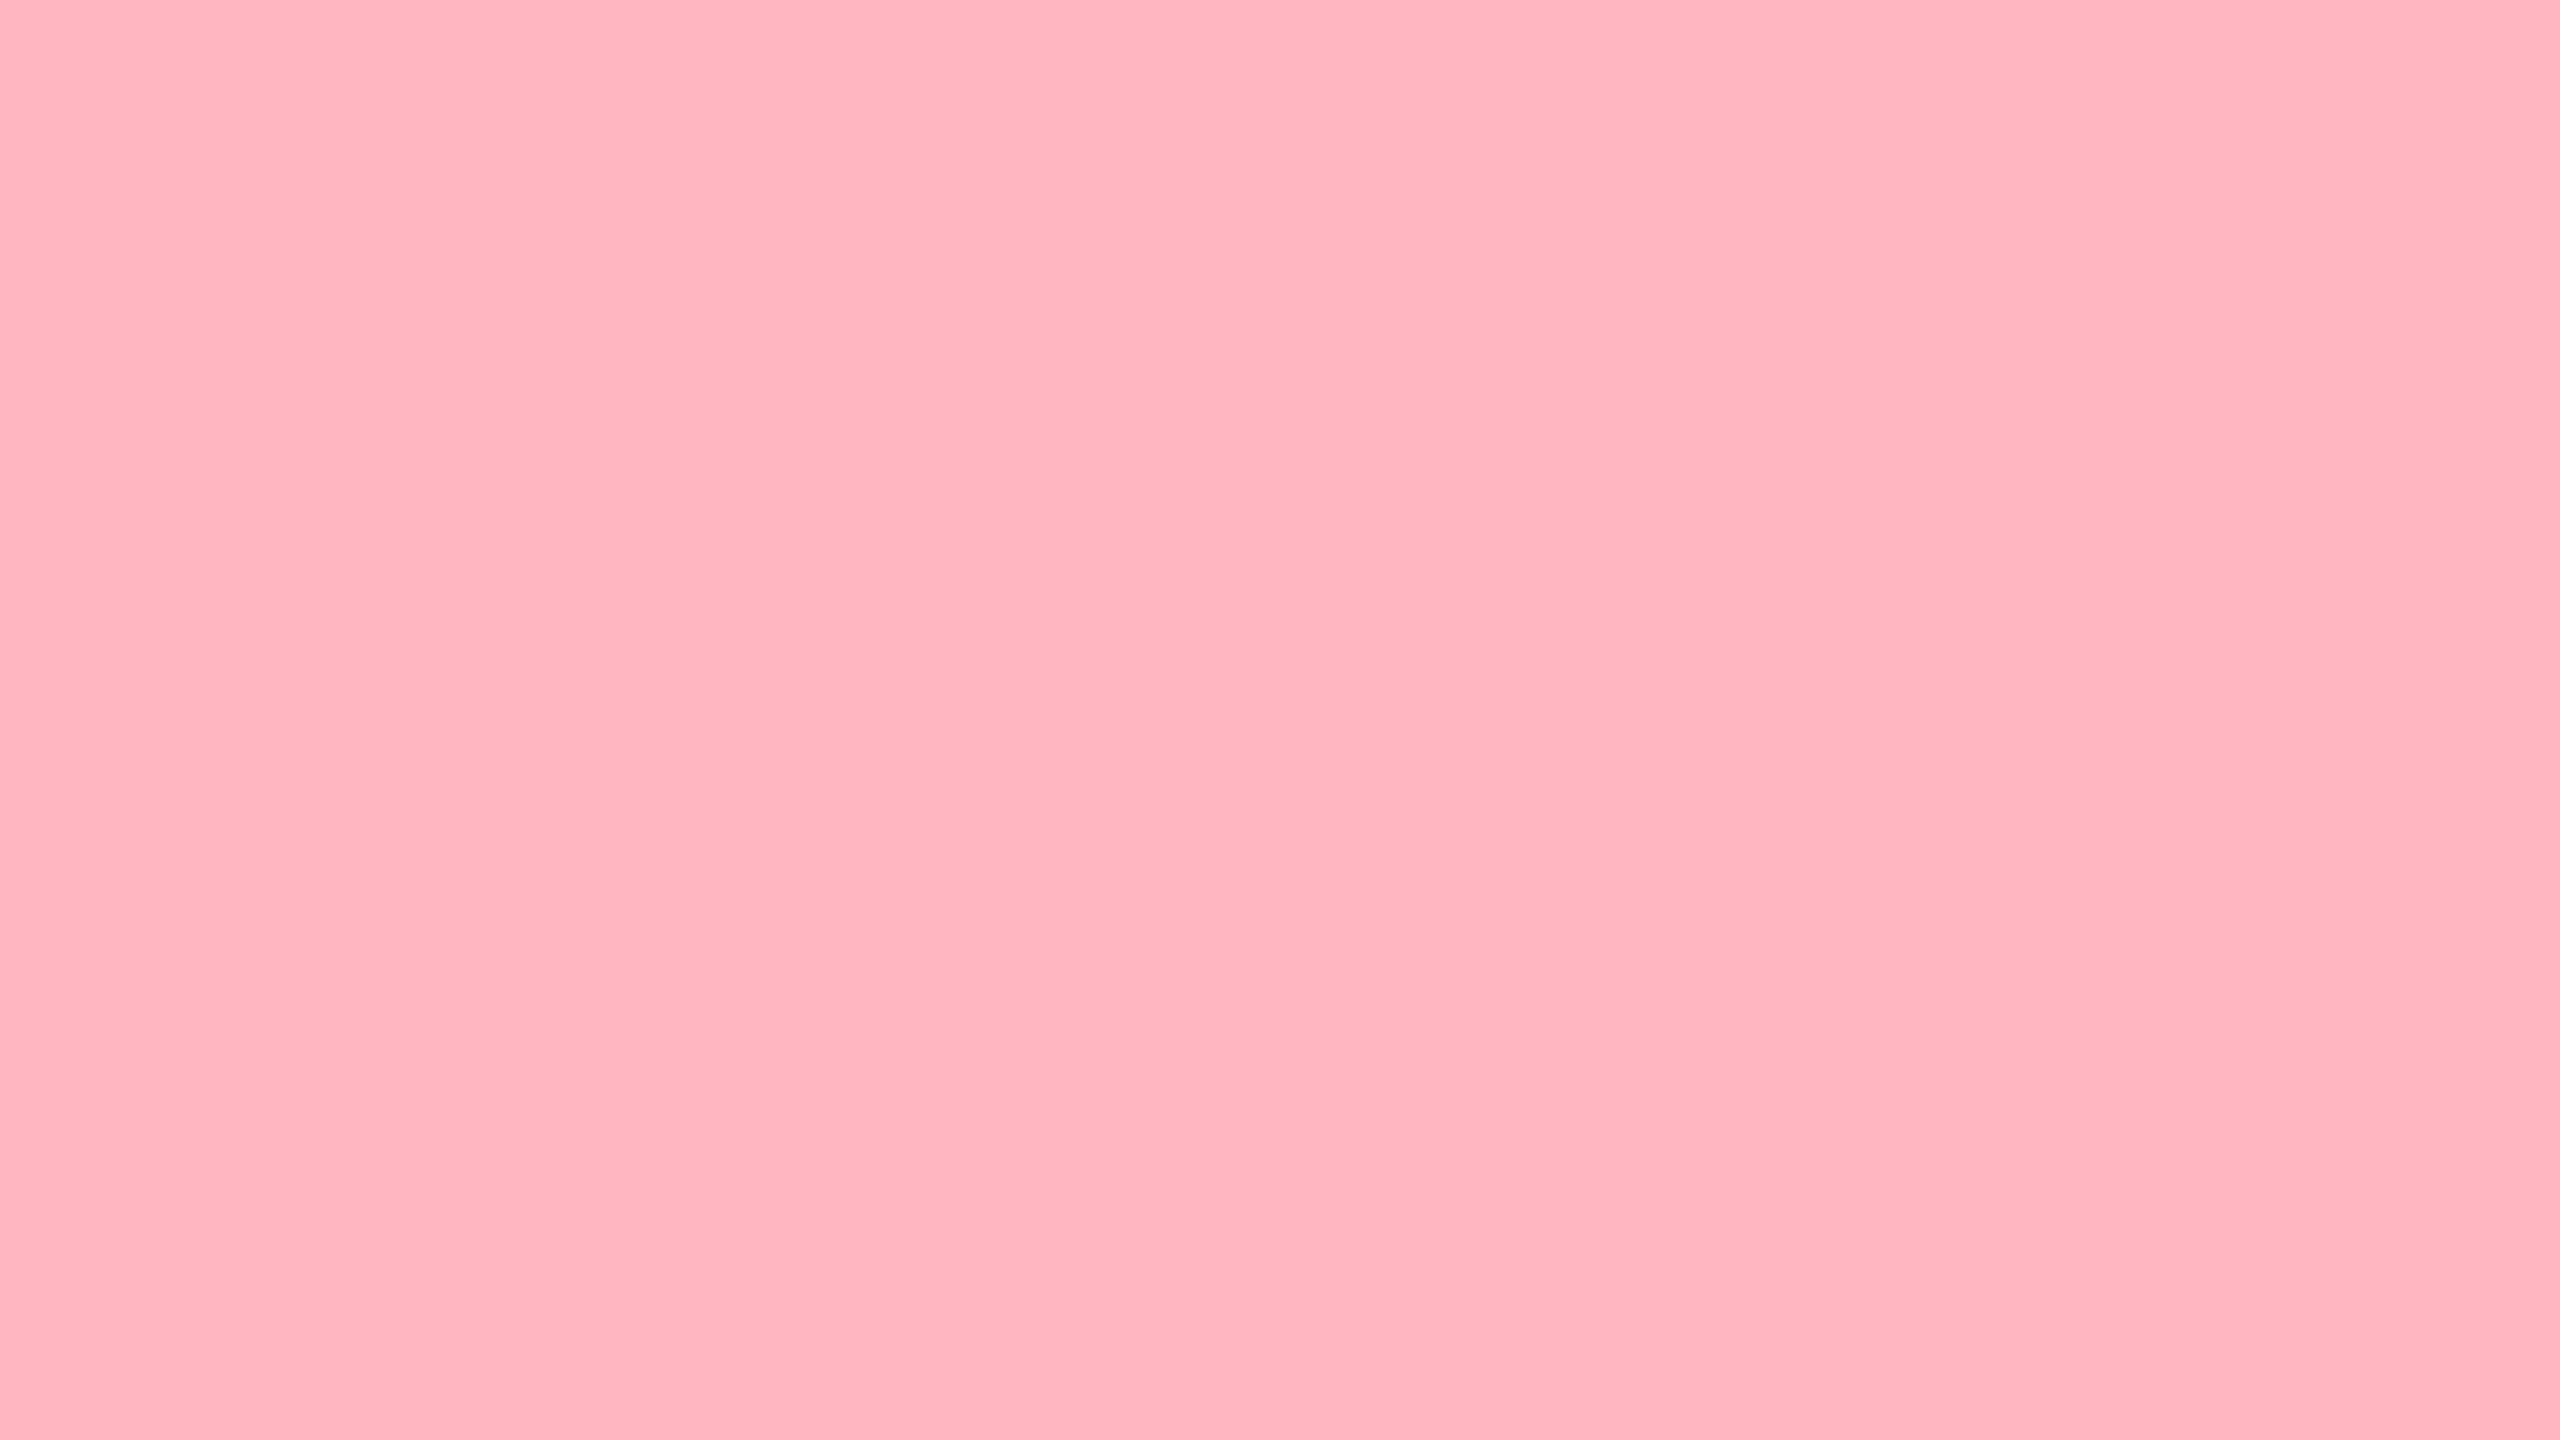 Light Pink Color Wallpaper Images Pictures   Becuo